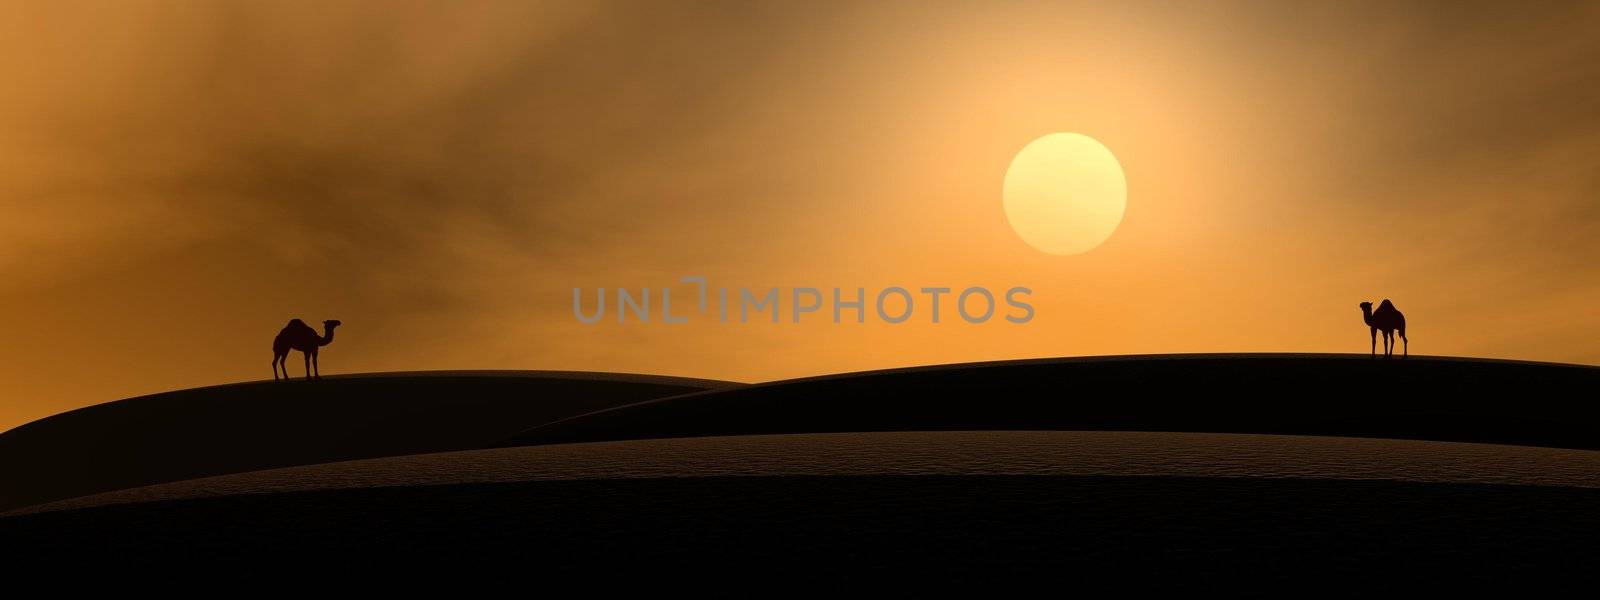 Two camel silouhettes looking at the sun in the desert by sunset